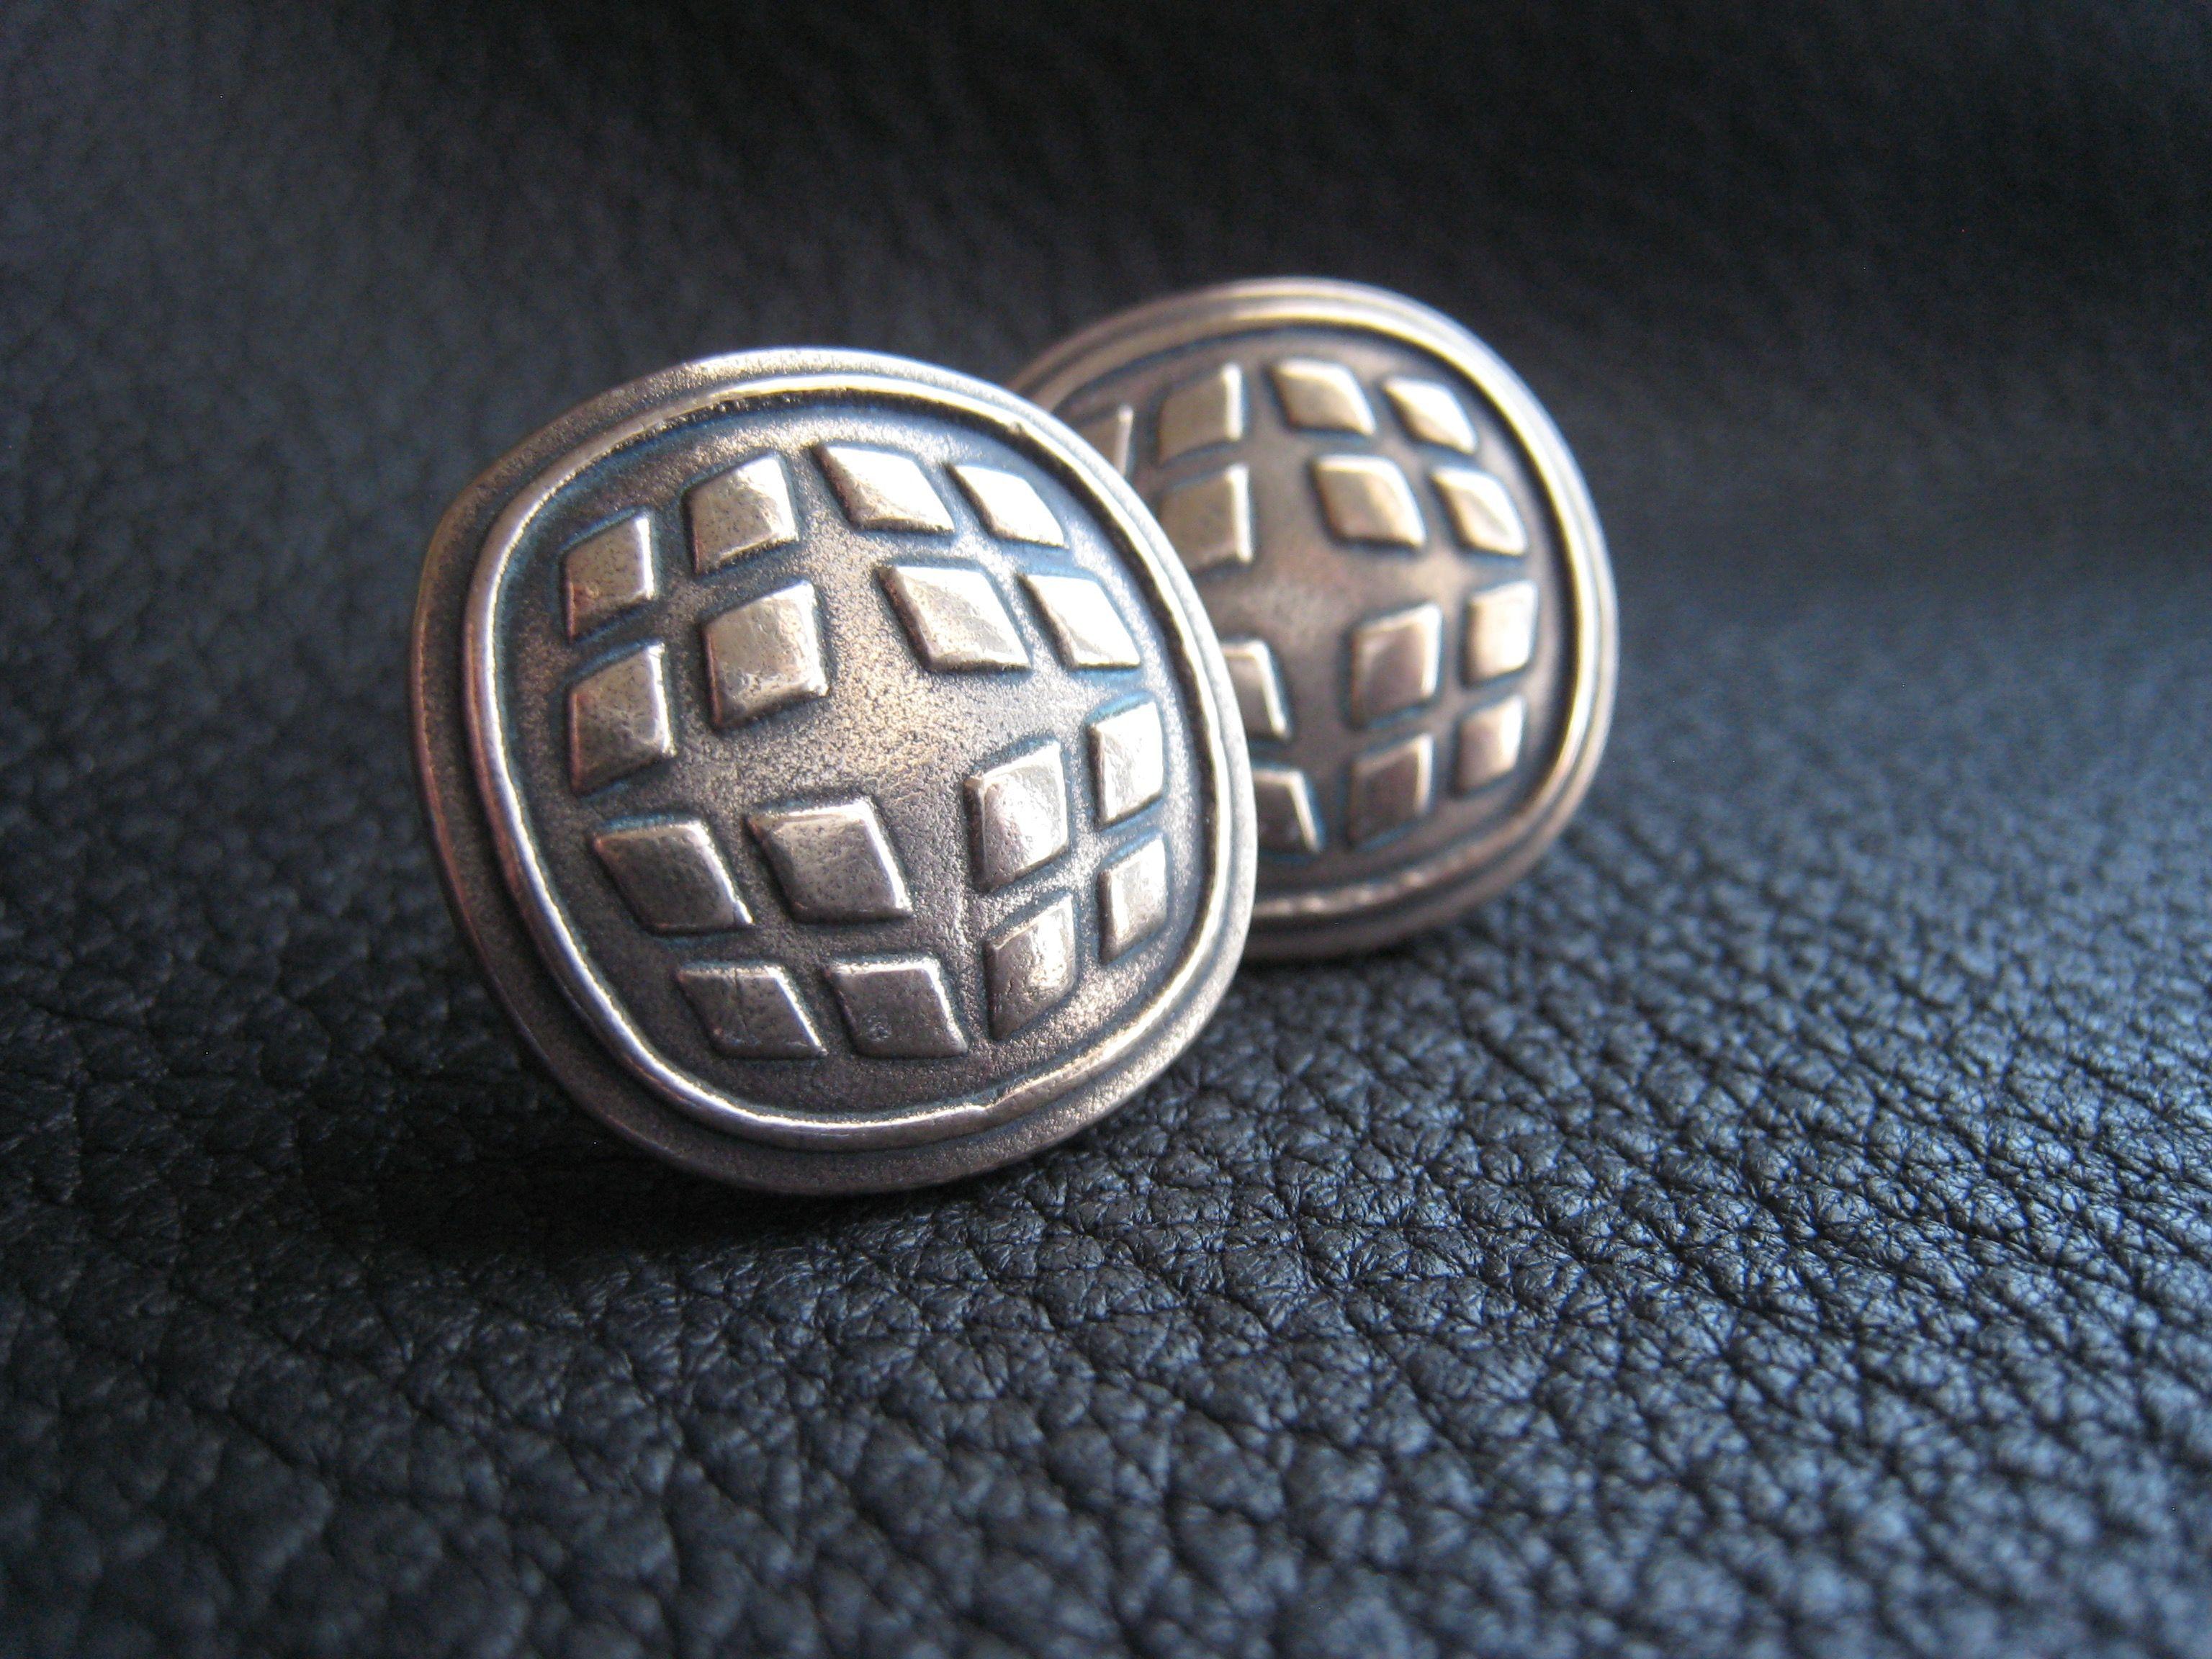 Bronze Company Logo - Hand Crafted Solid Bronze Golden Cuff Links Cufflinks With Company ...